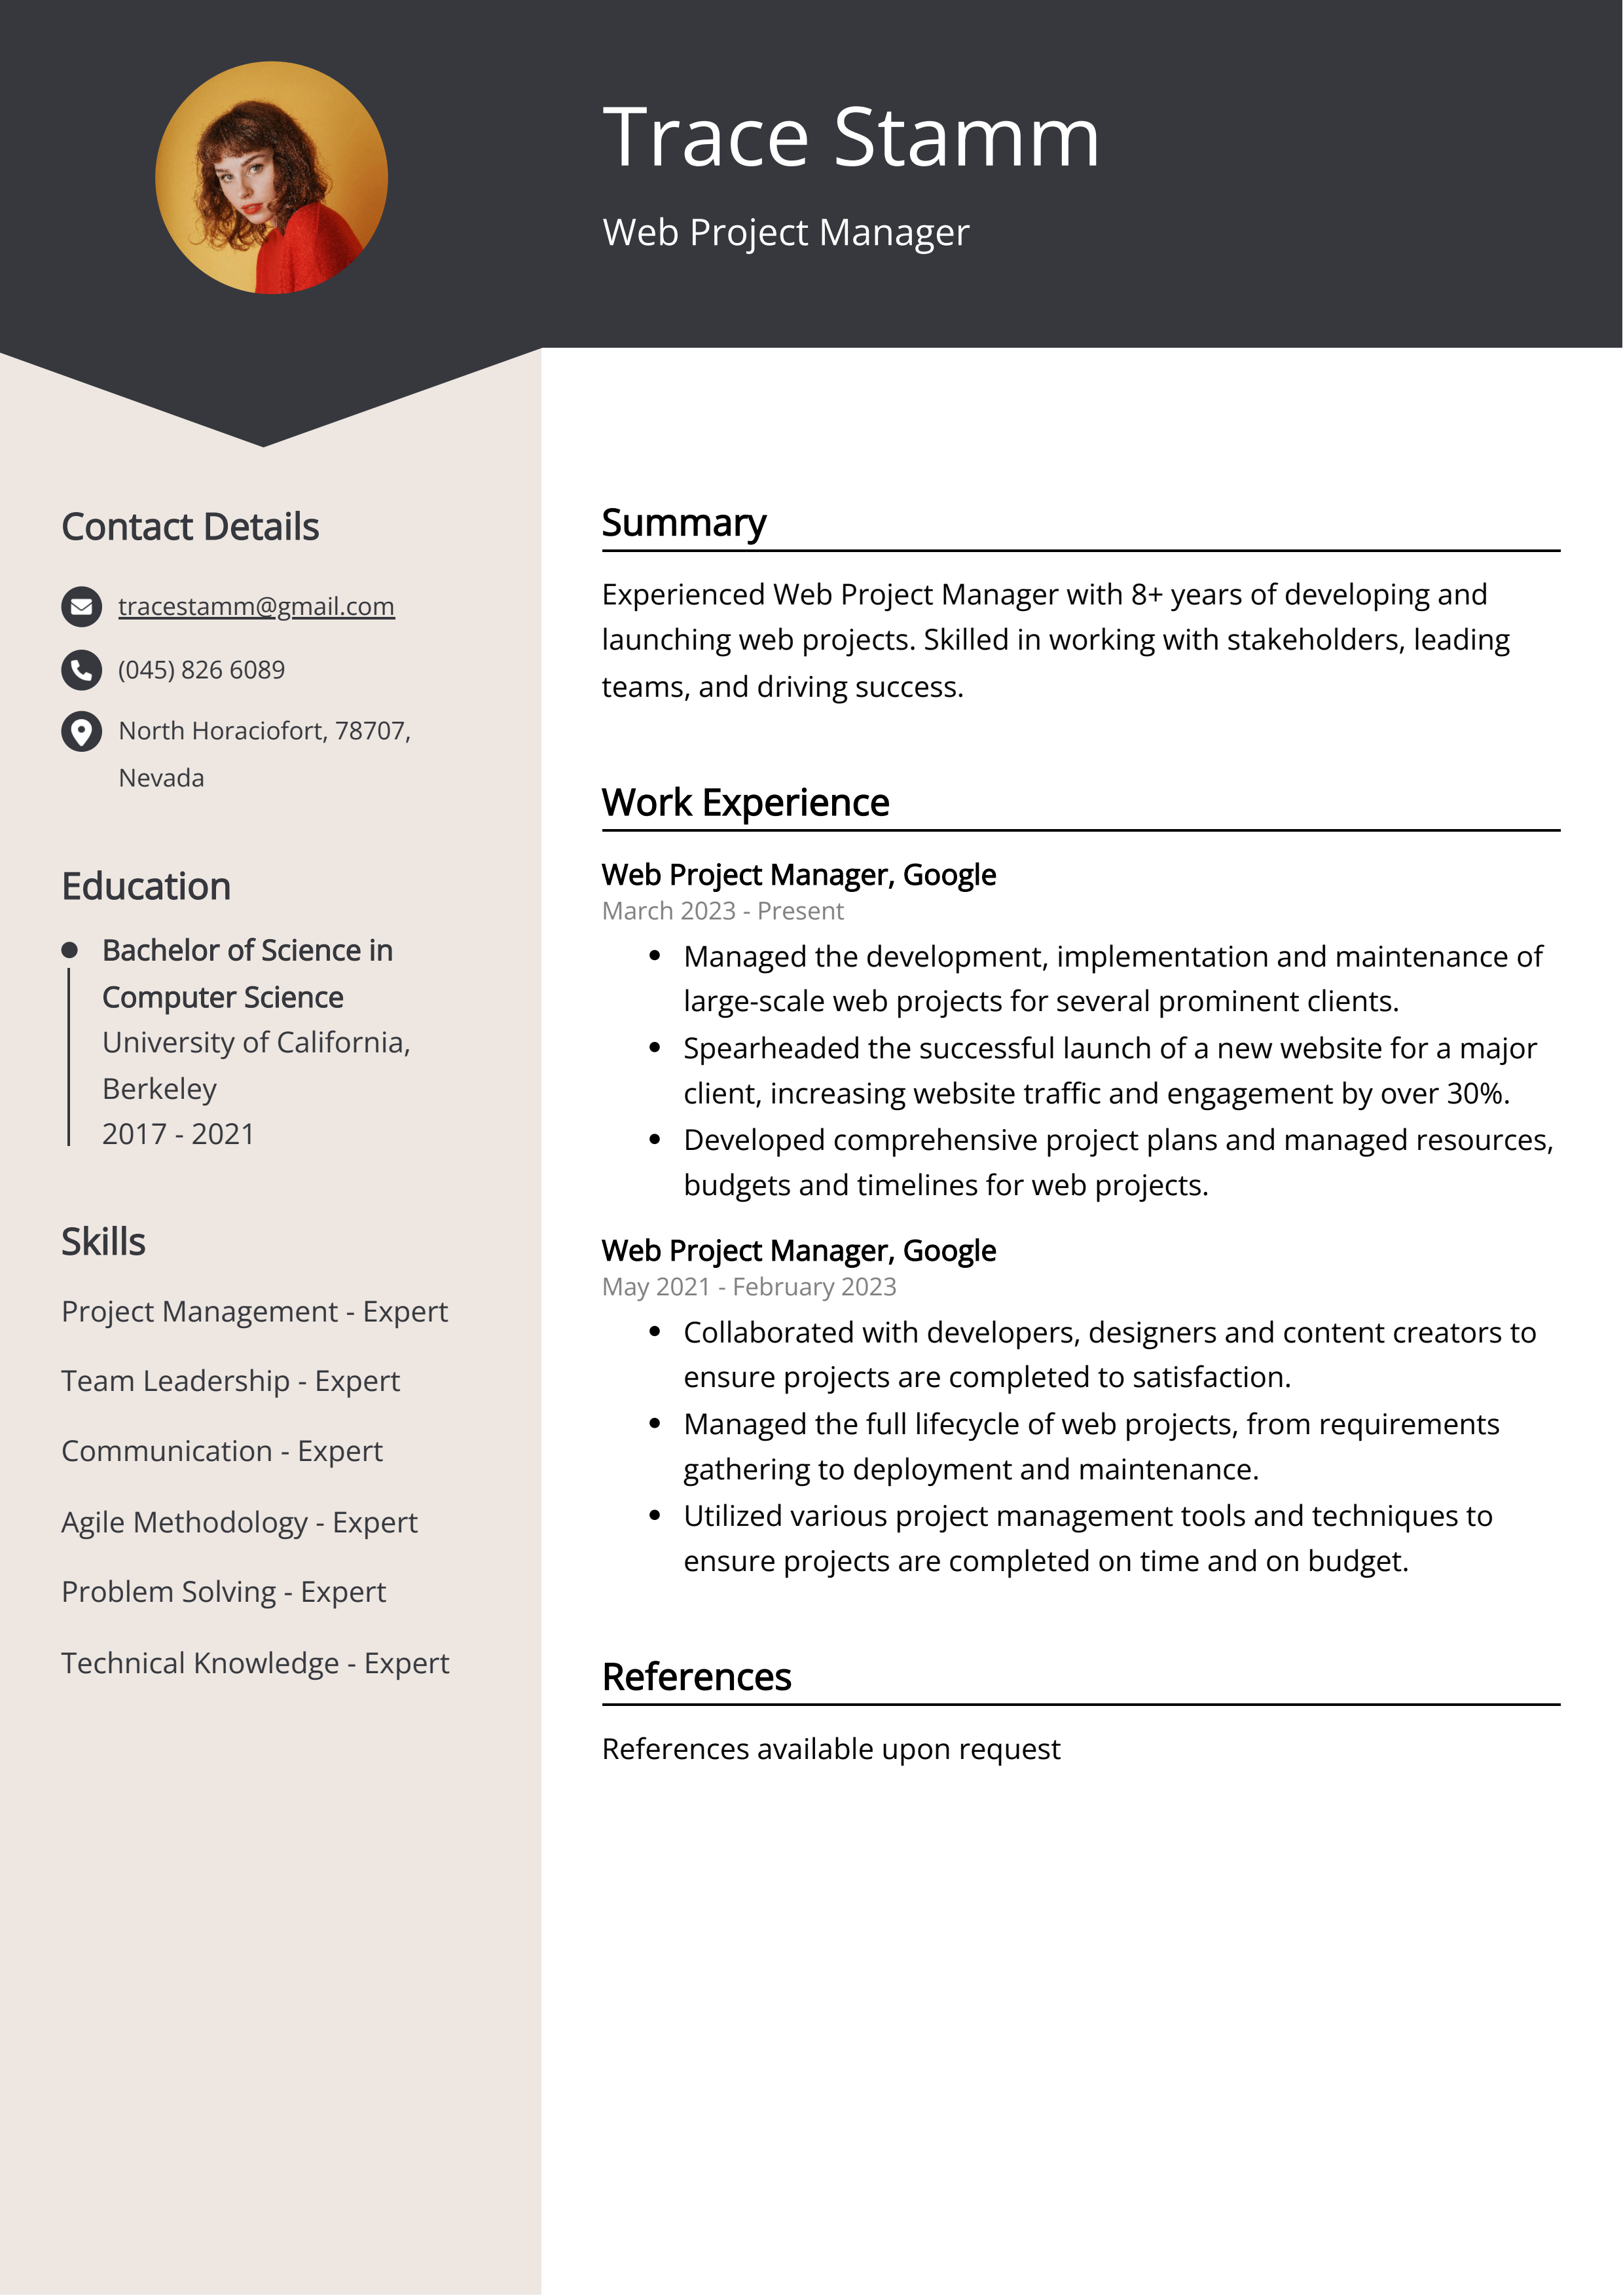 Web Project Manager CV Example